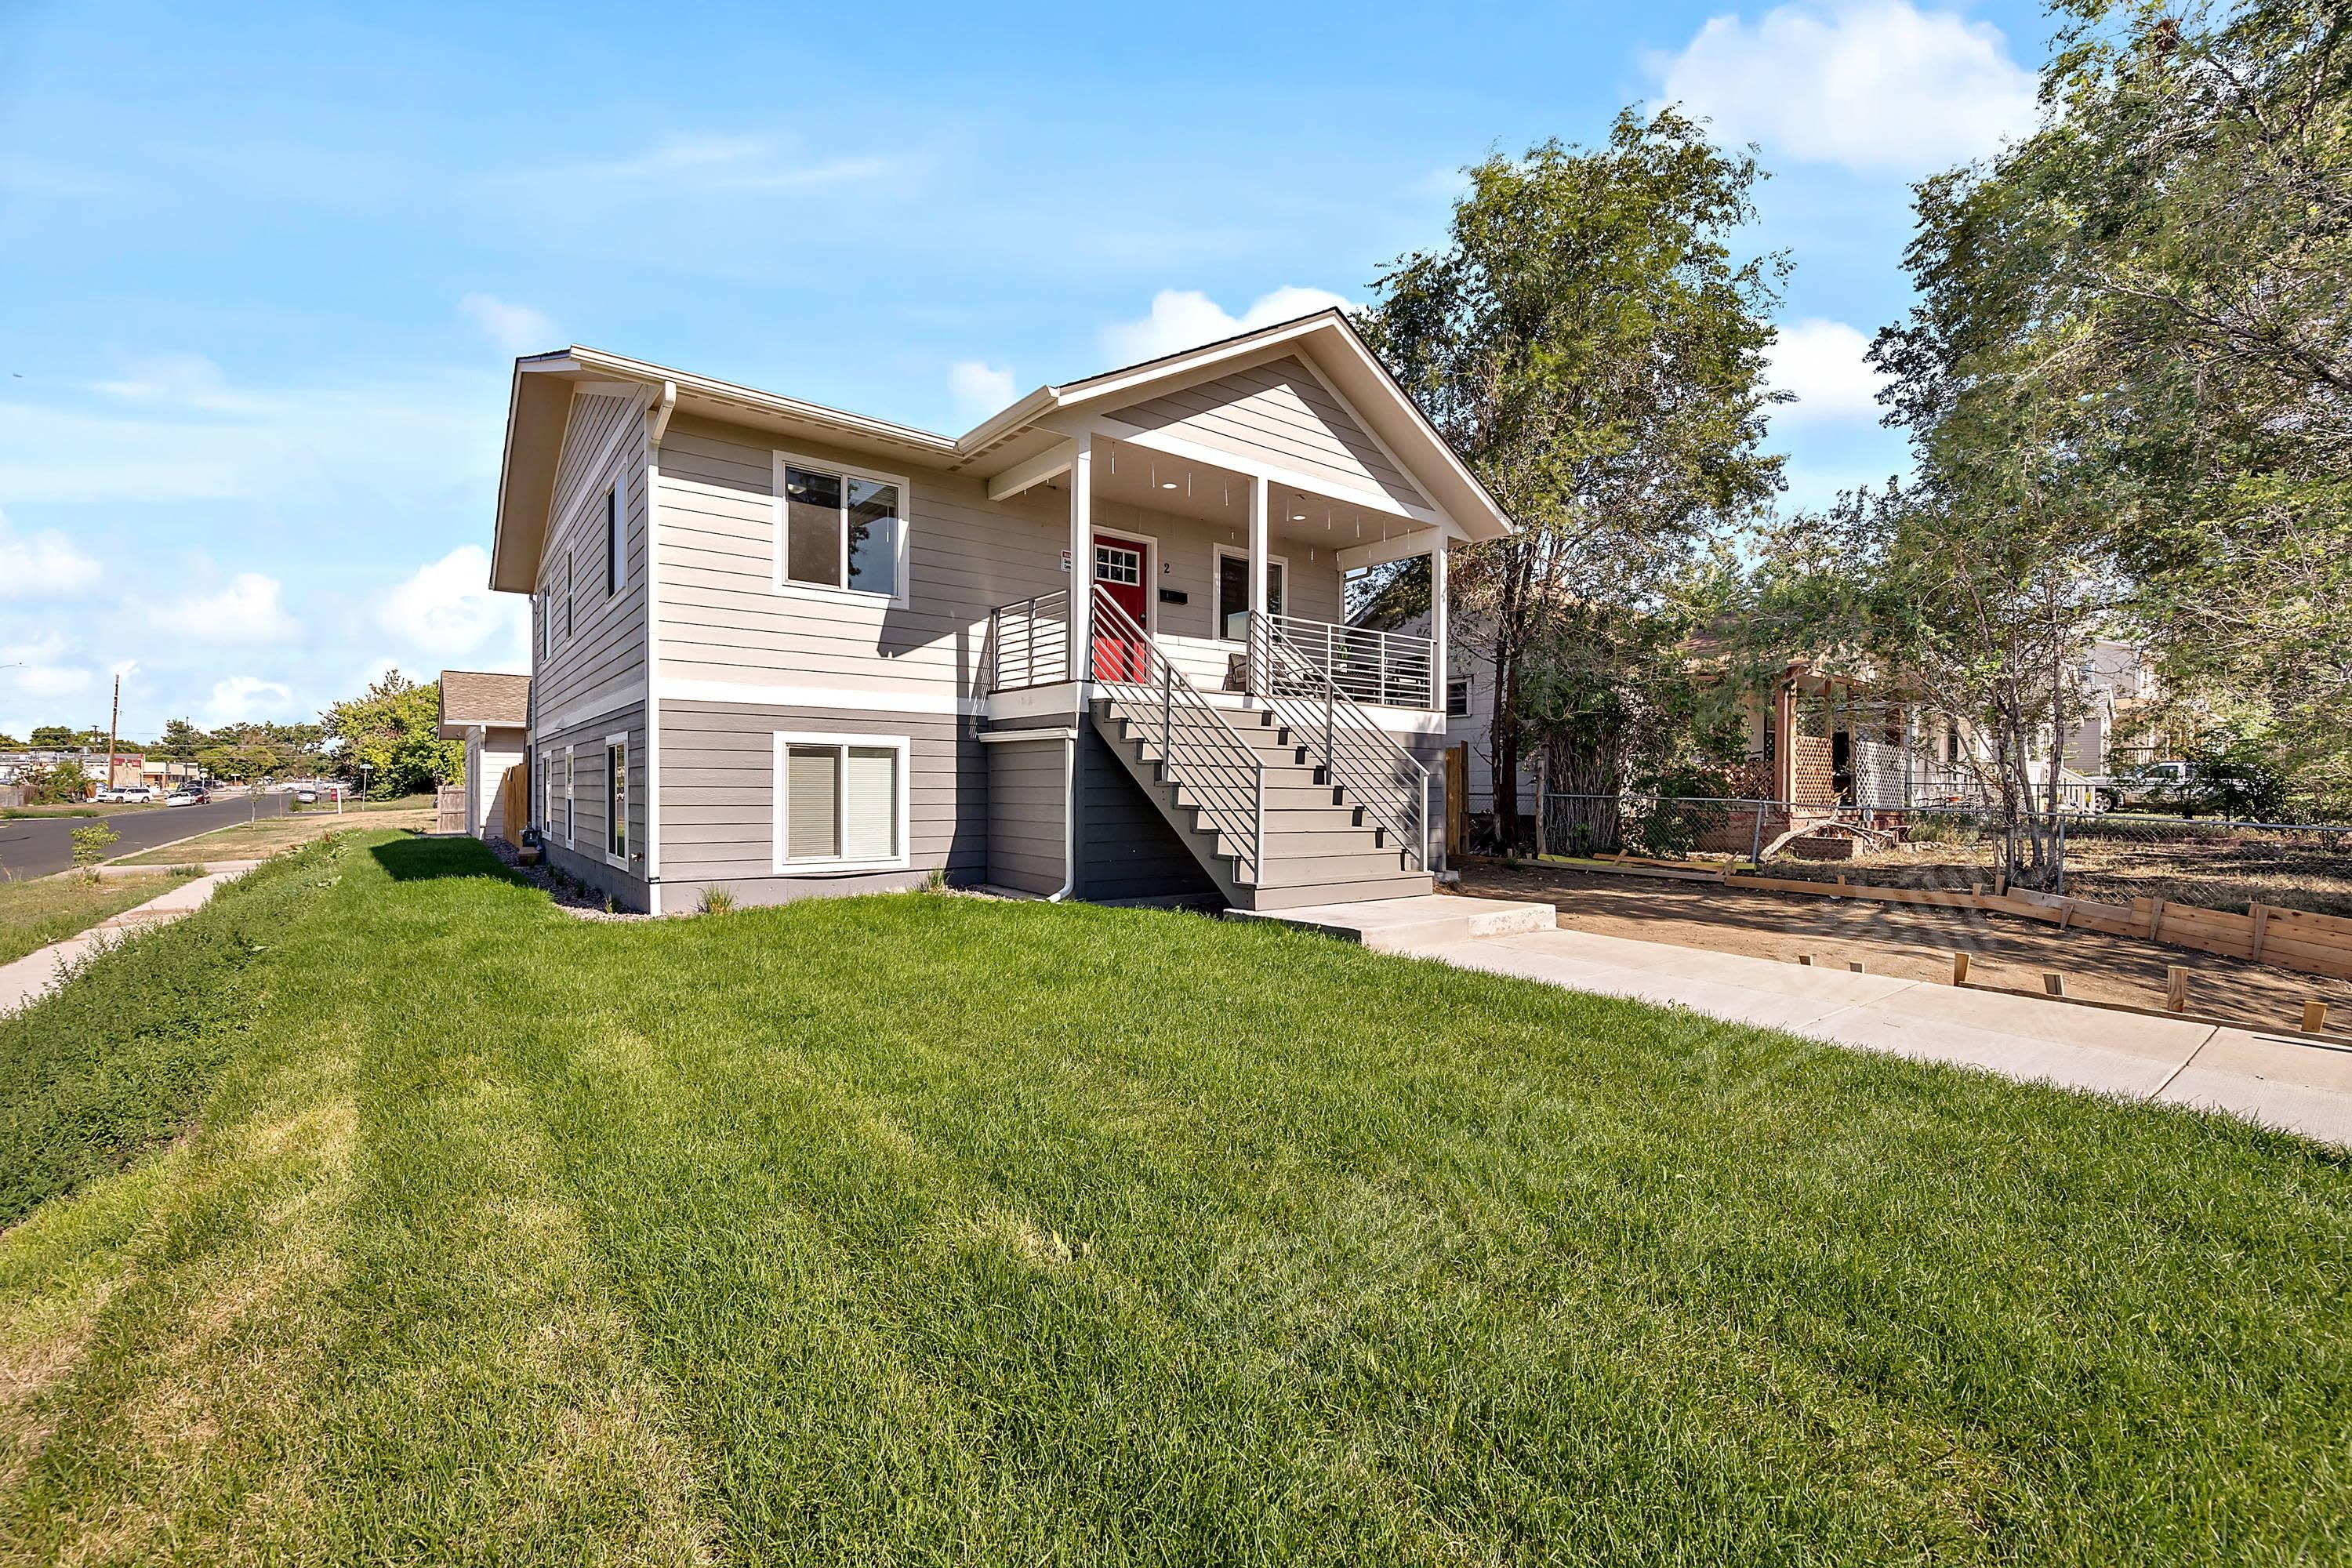 Incredible Content Creation Home 5 mins from DOWNTOWN DENVER